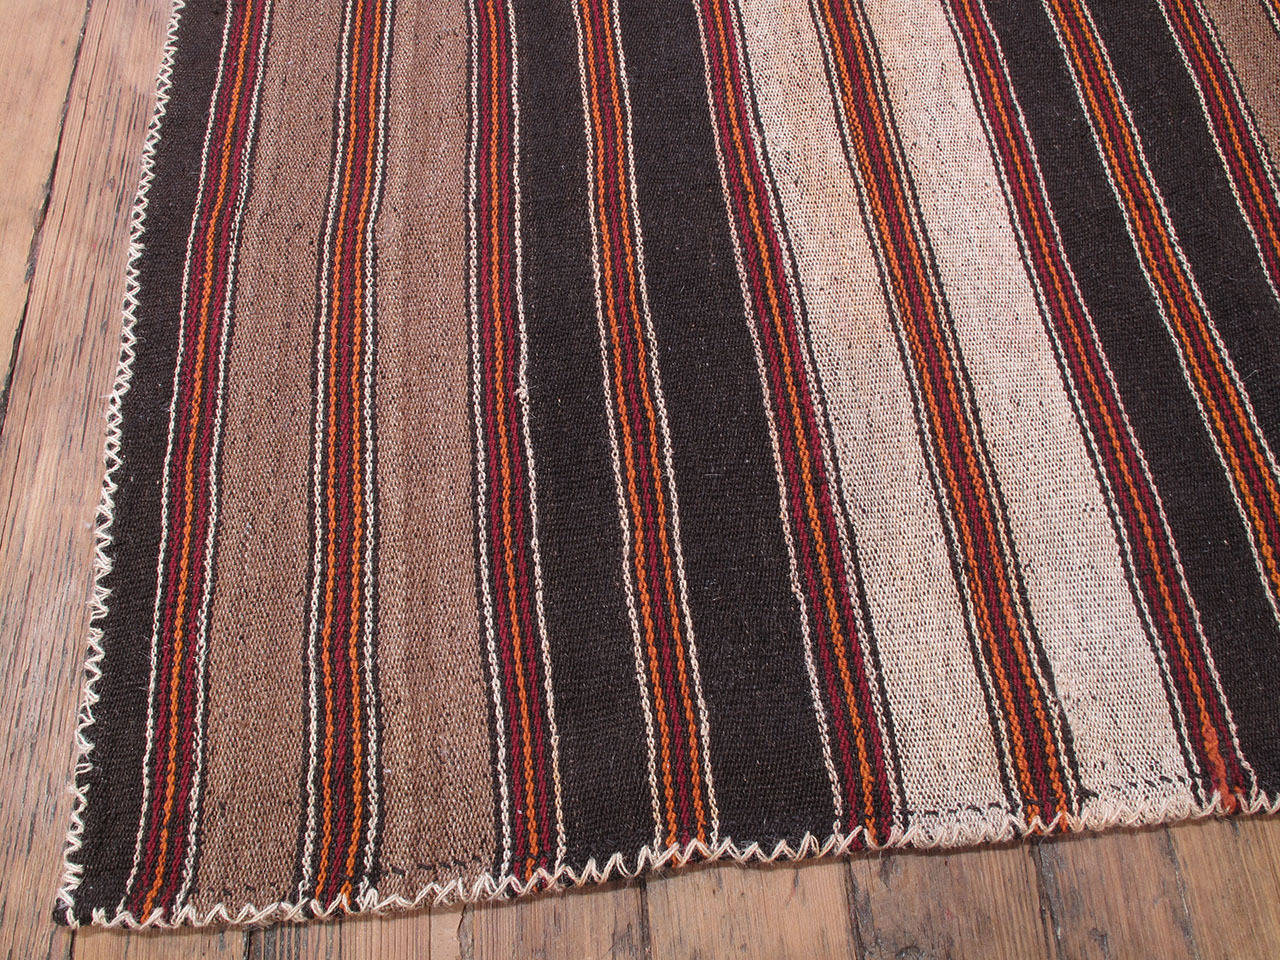 20th Century Kilim Rug with Vertical Stripes 